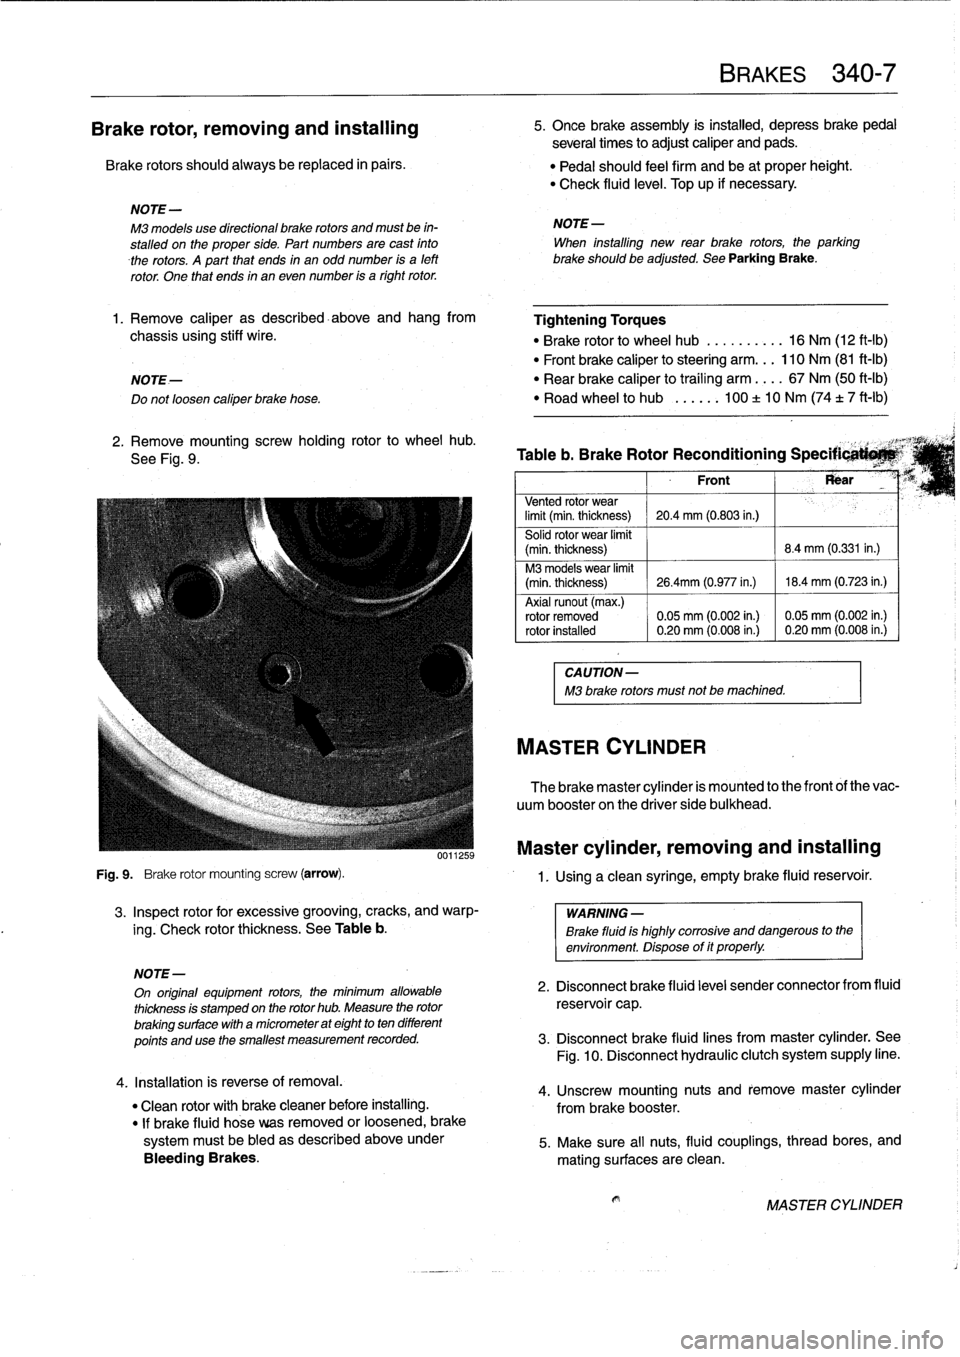 BMW 328i 1993 E36 Workshop Manual 
Brake
rotor,
removing
and
installing

Brake
rotors
shouldalways
be
replaced
in
pairs
.

Fig
.
9
.

	

Brake
rotor
mounting
screw
(arrow)
.

3
.
Inspect
rotor
for
excessive
grooving,
cracks,
and
warp-